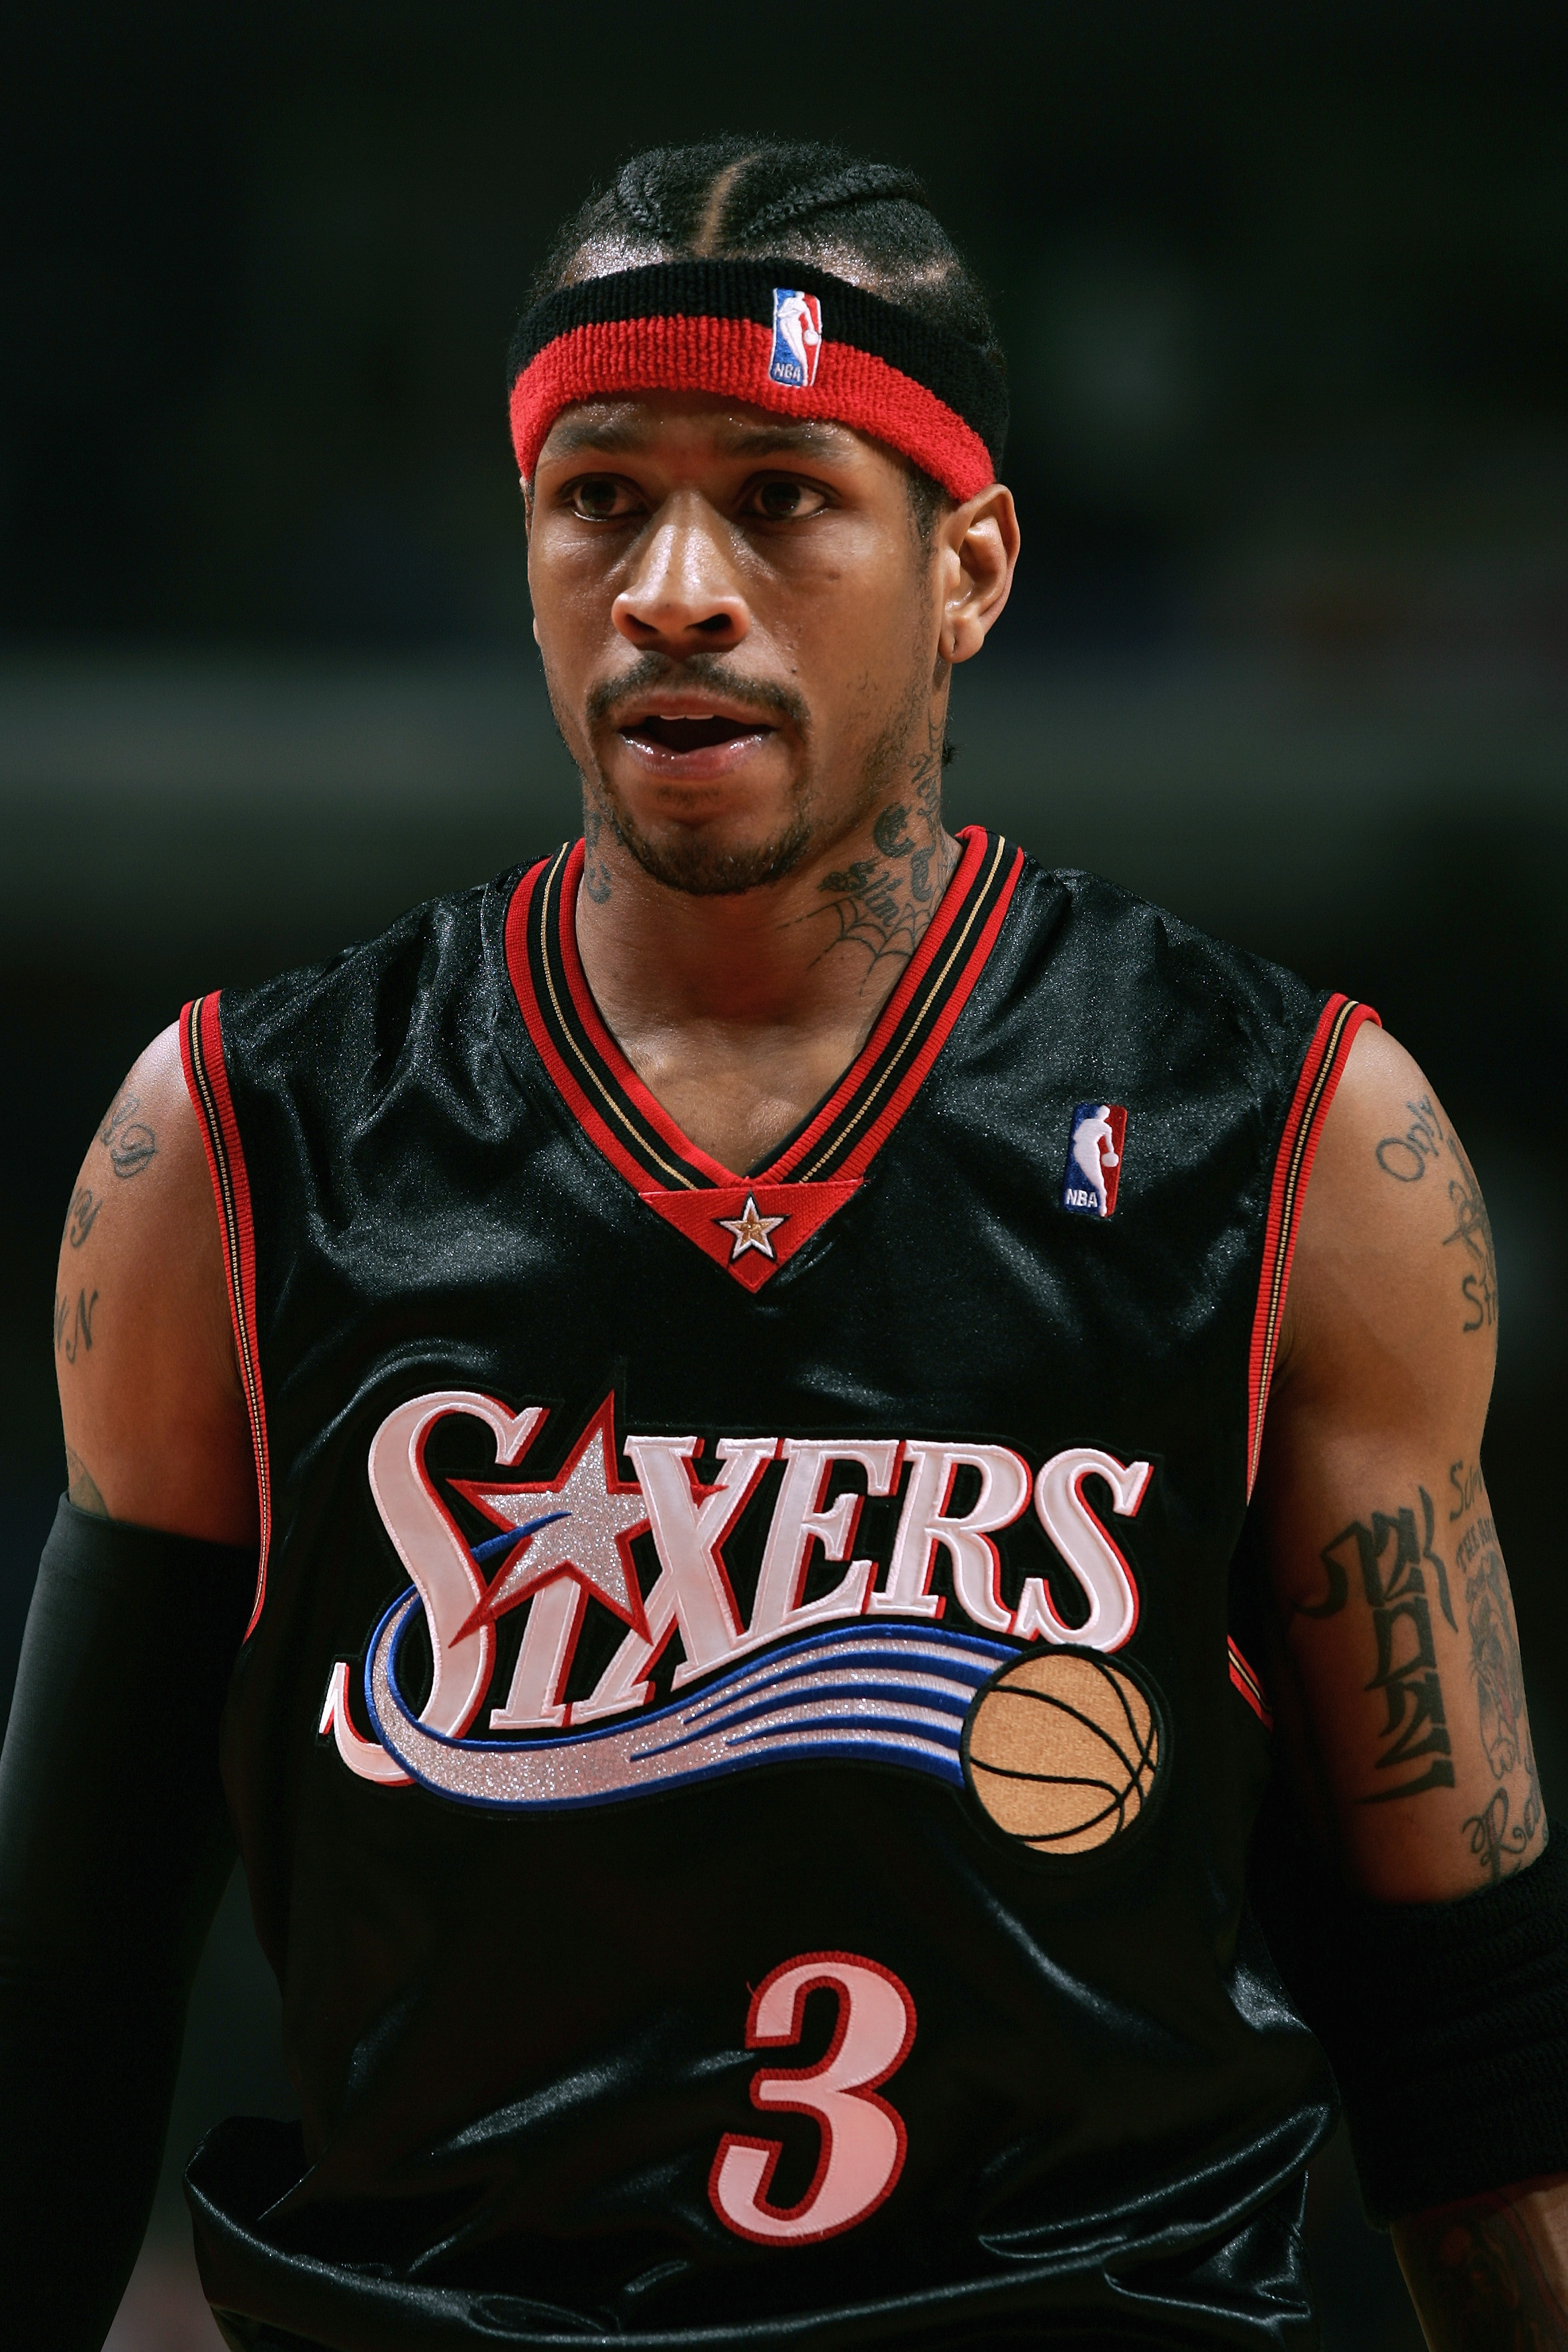 CHICAGO - FEBRUARY 16:  Allen Iverson #3 of the Philadelphia 76ers stands on the court during the game with the Chicago Bulls on February 16, 2006 at the United Center in Chicago, Illinois. The Bulls defeated the 76ers 117-84. NOTE TO USER: User expressly